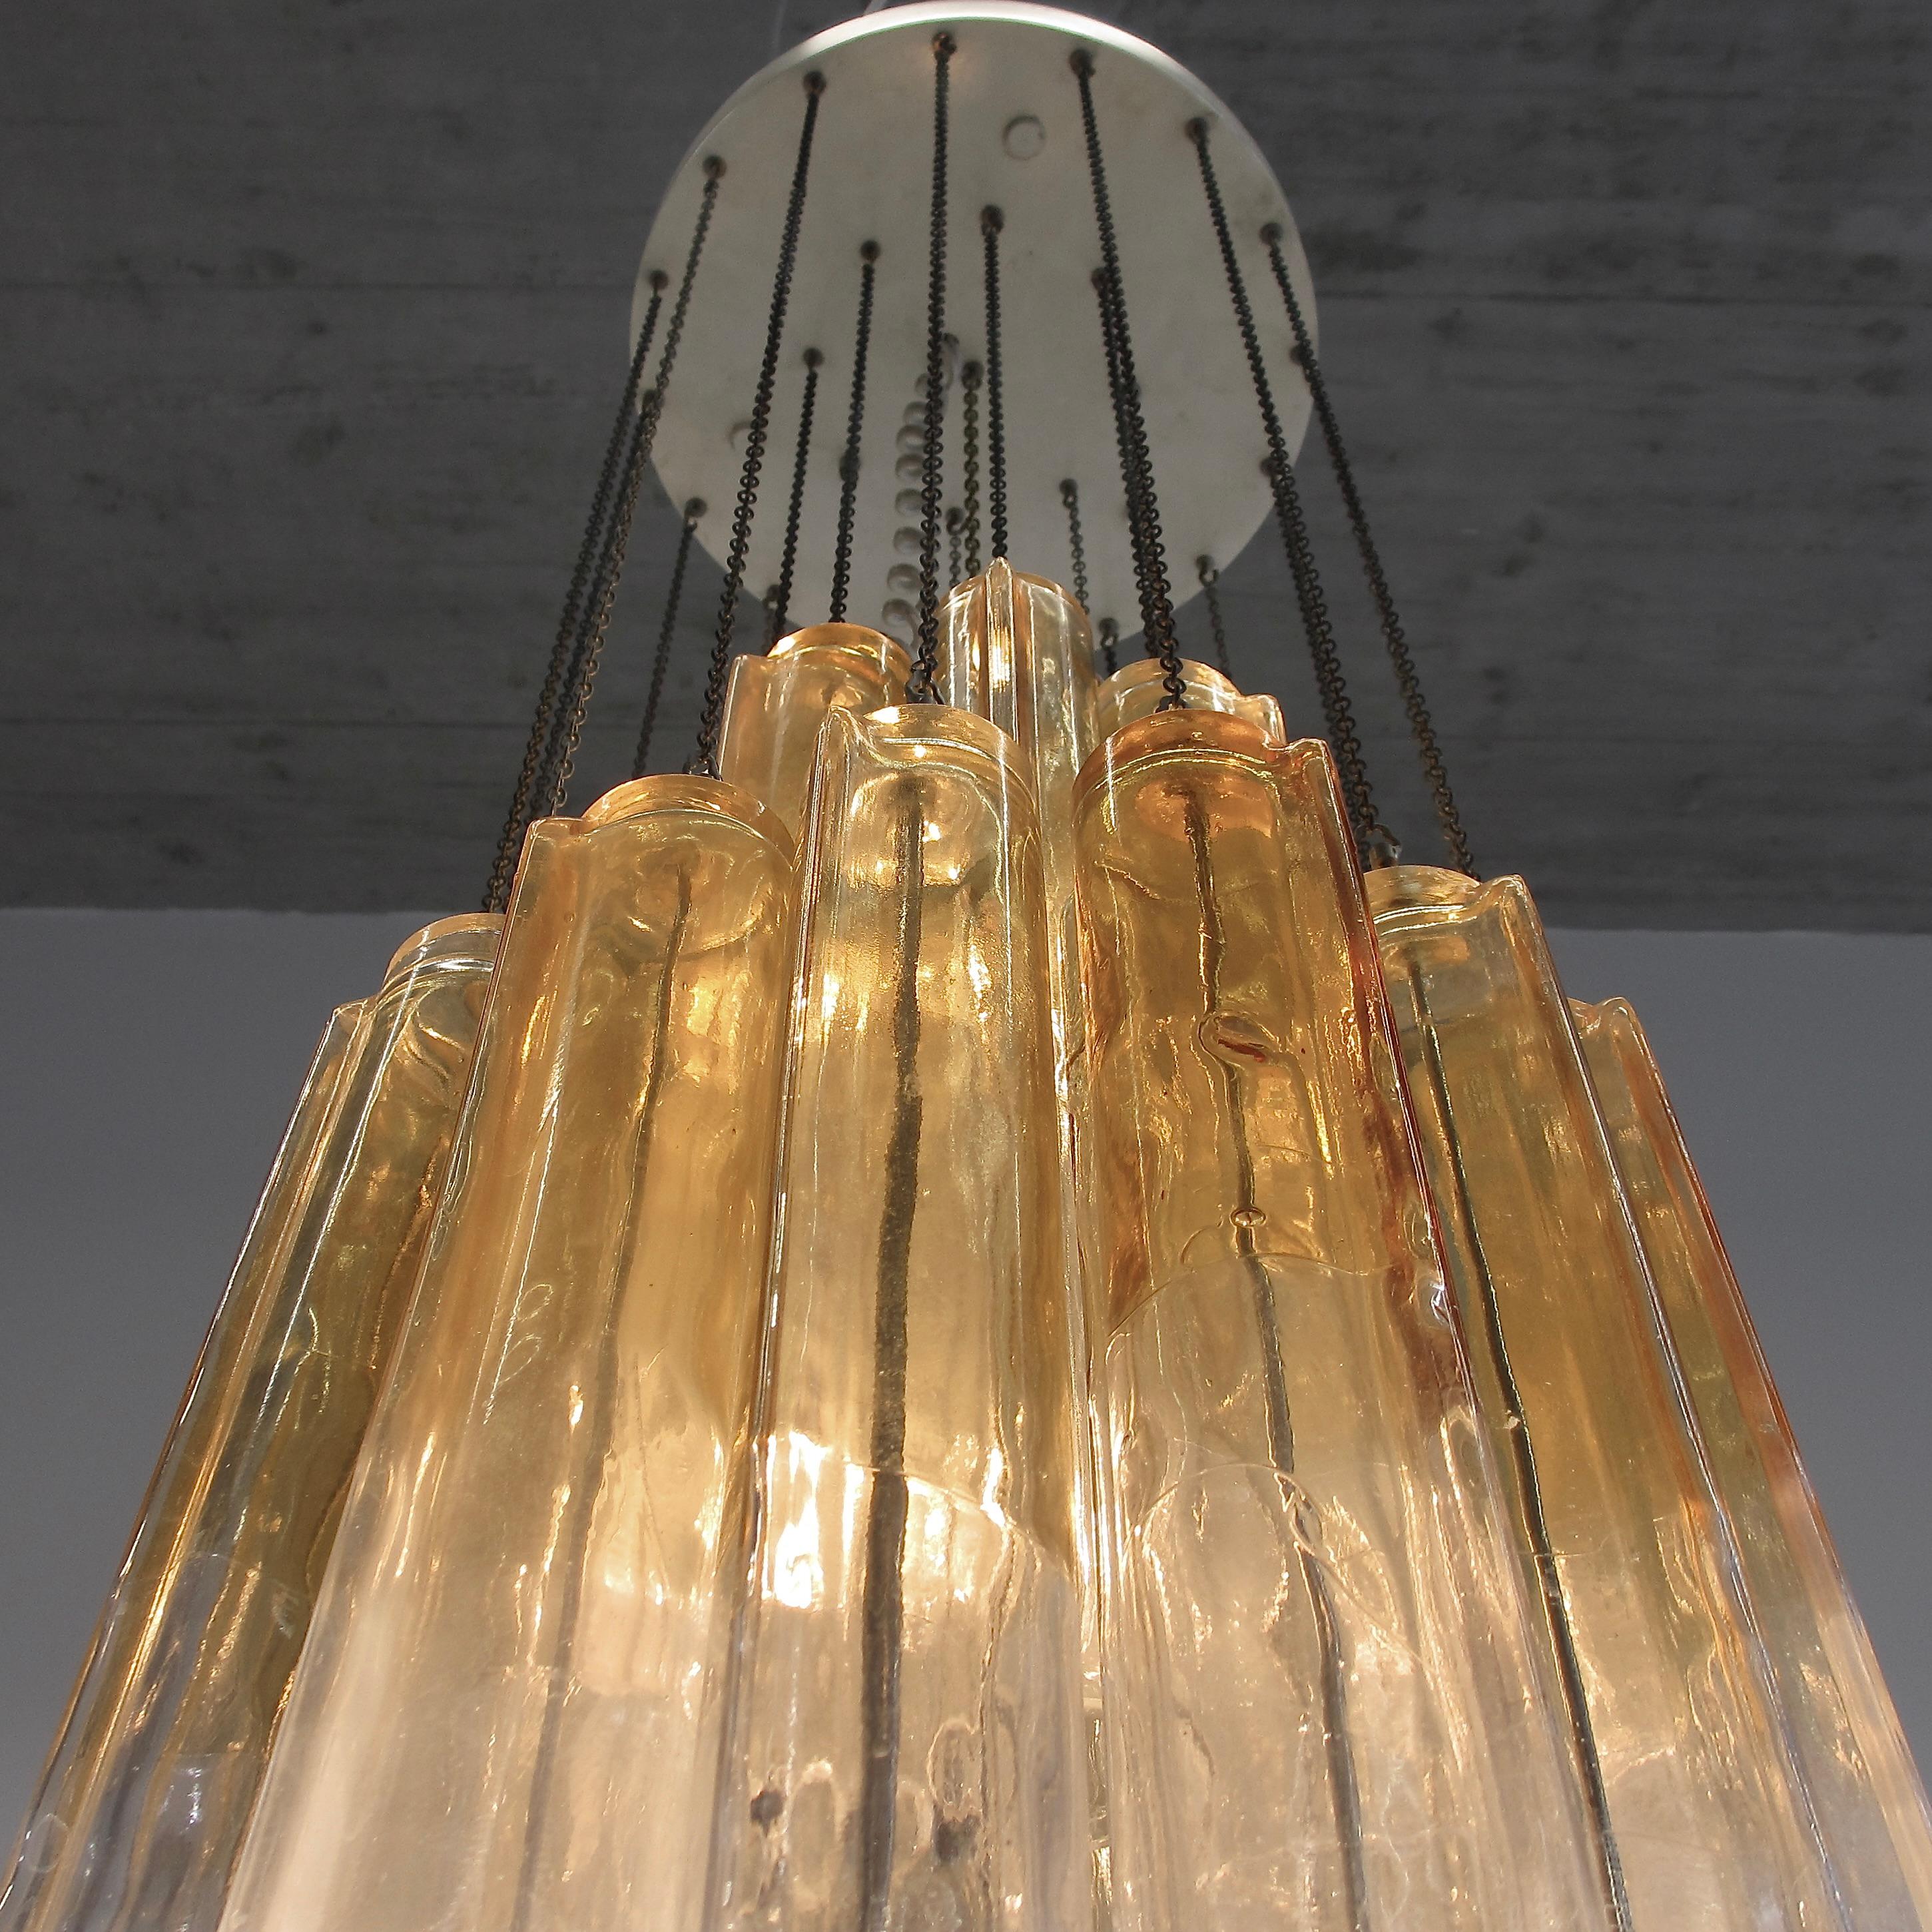 Original large Venini glass chandelier. Italy, Murano, 1960.

A large chandelier with hand-blown 